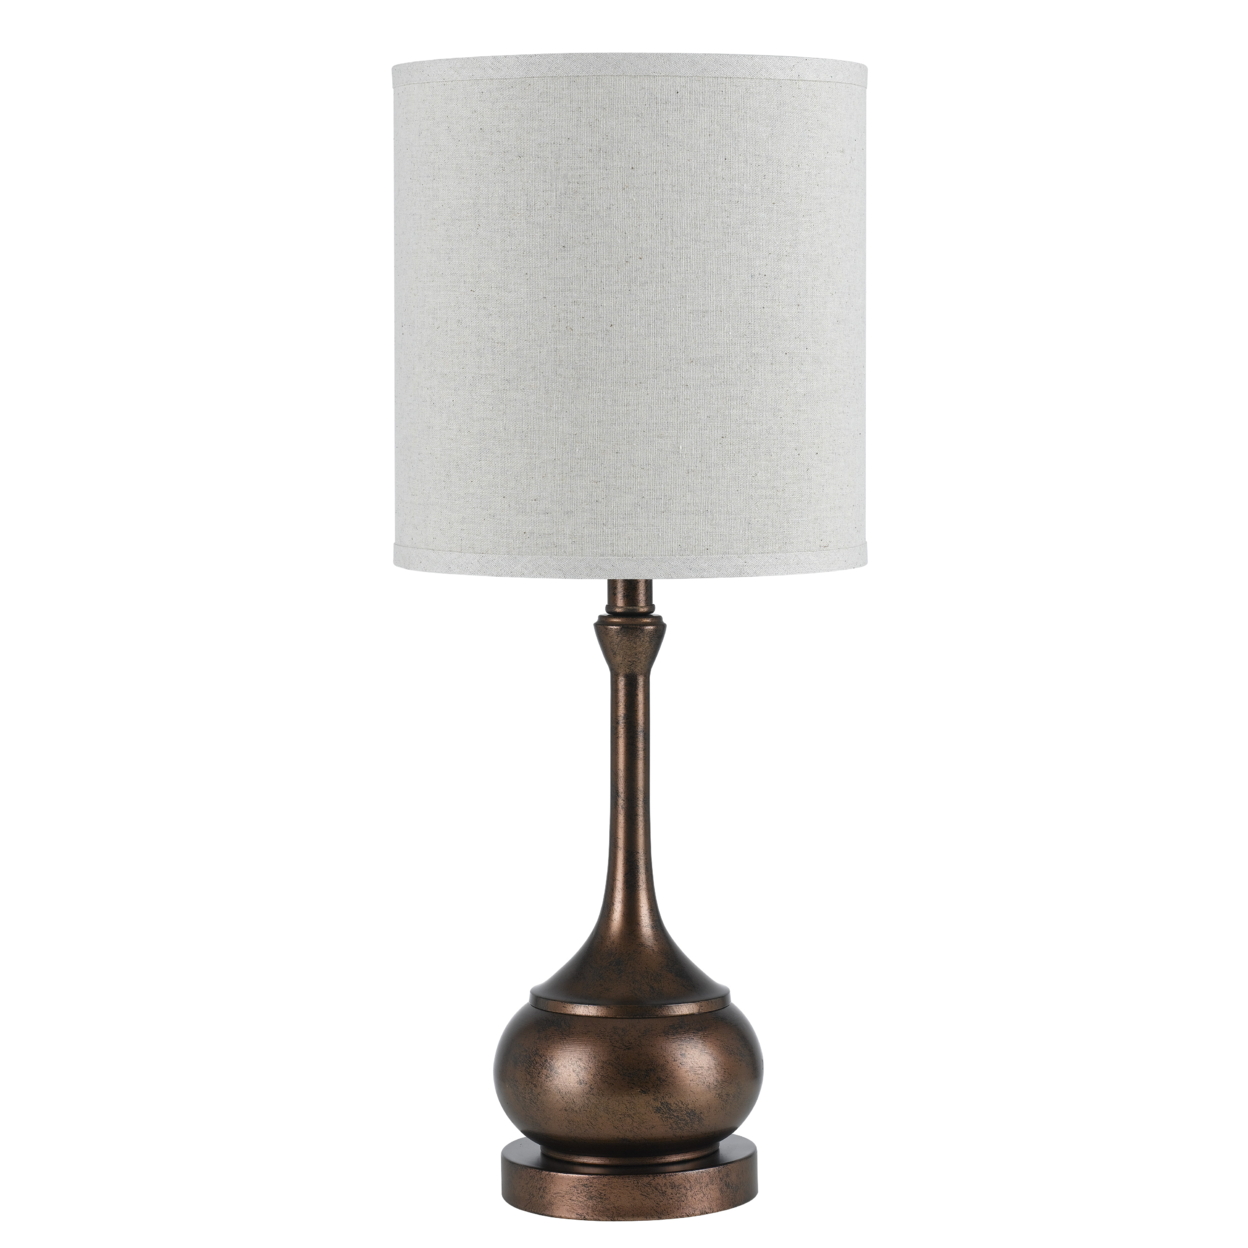 Elongated Bellied Shape Metal Accent Lamp With Drum Shade, Rustic Bronze- Saltoro Sherpi